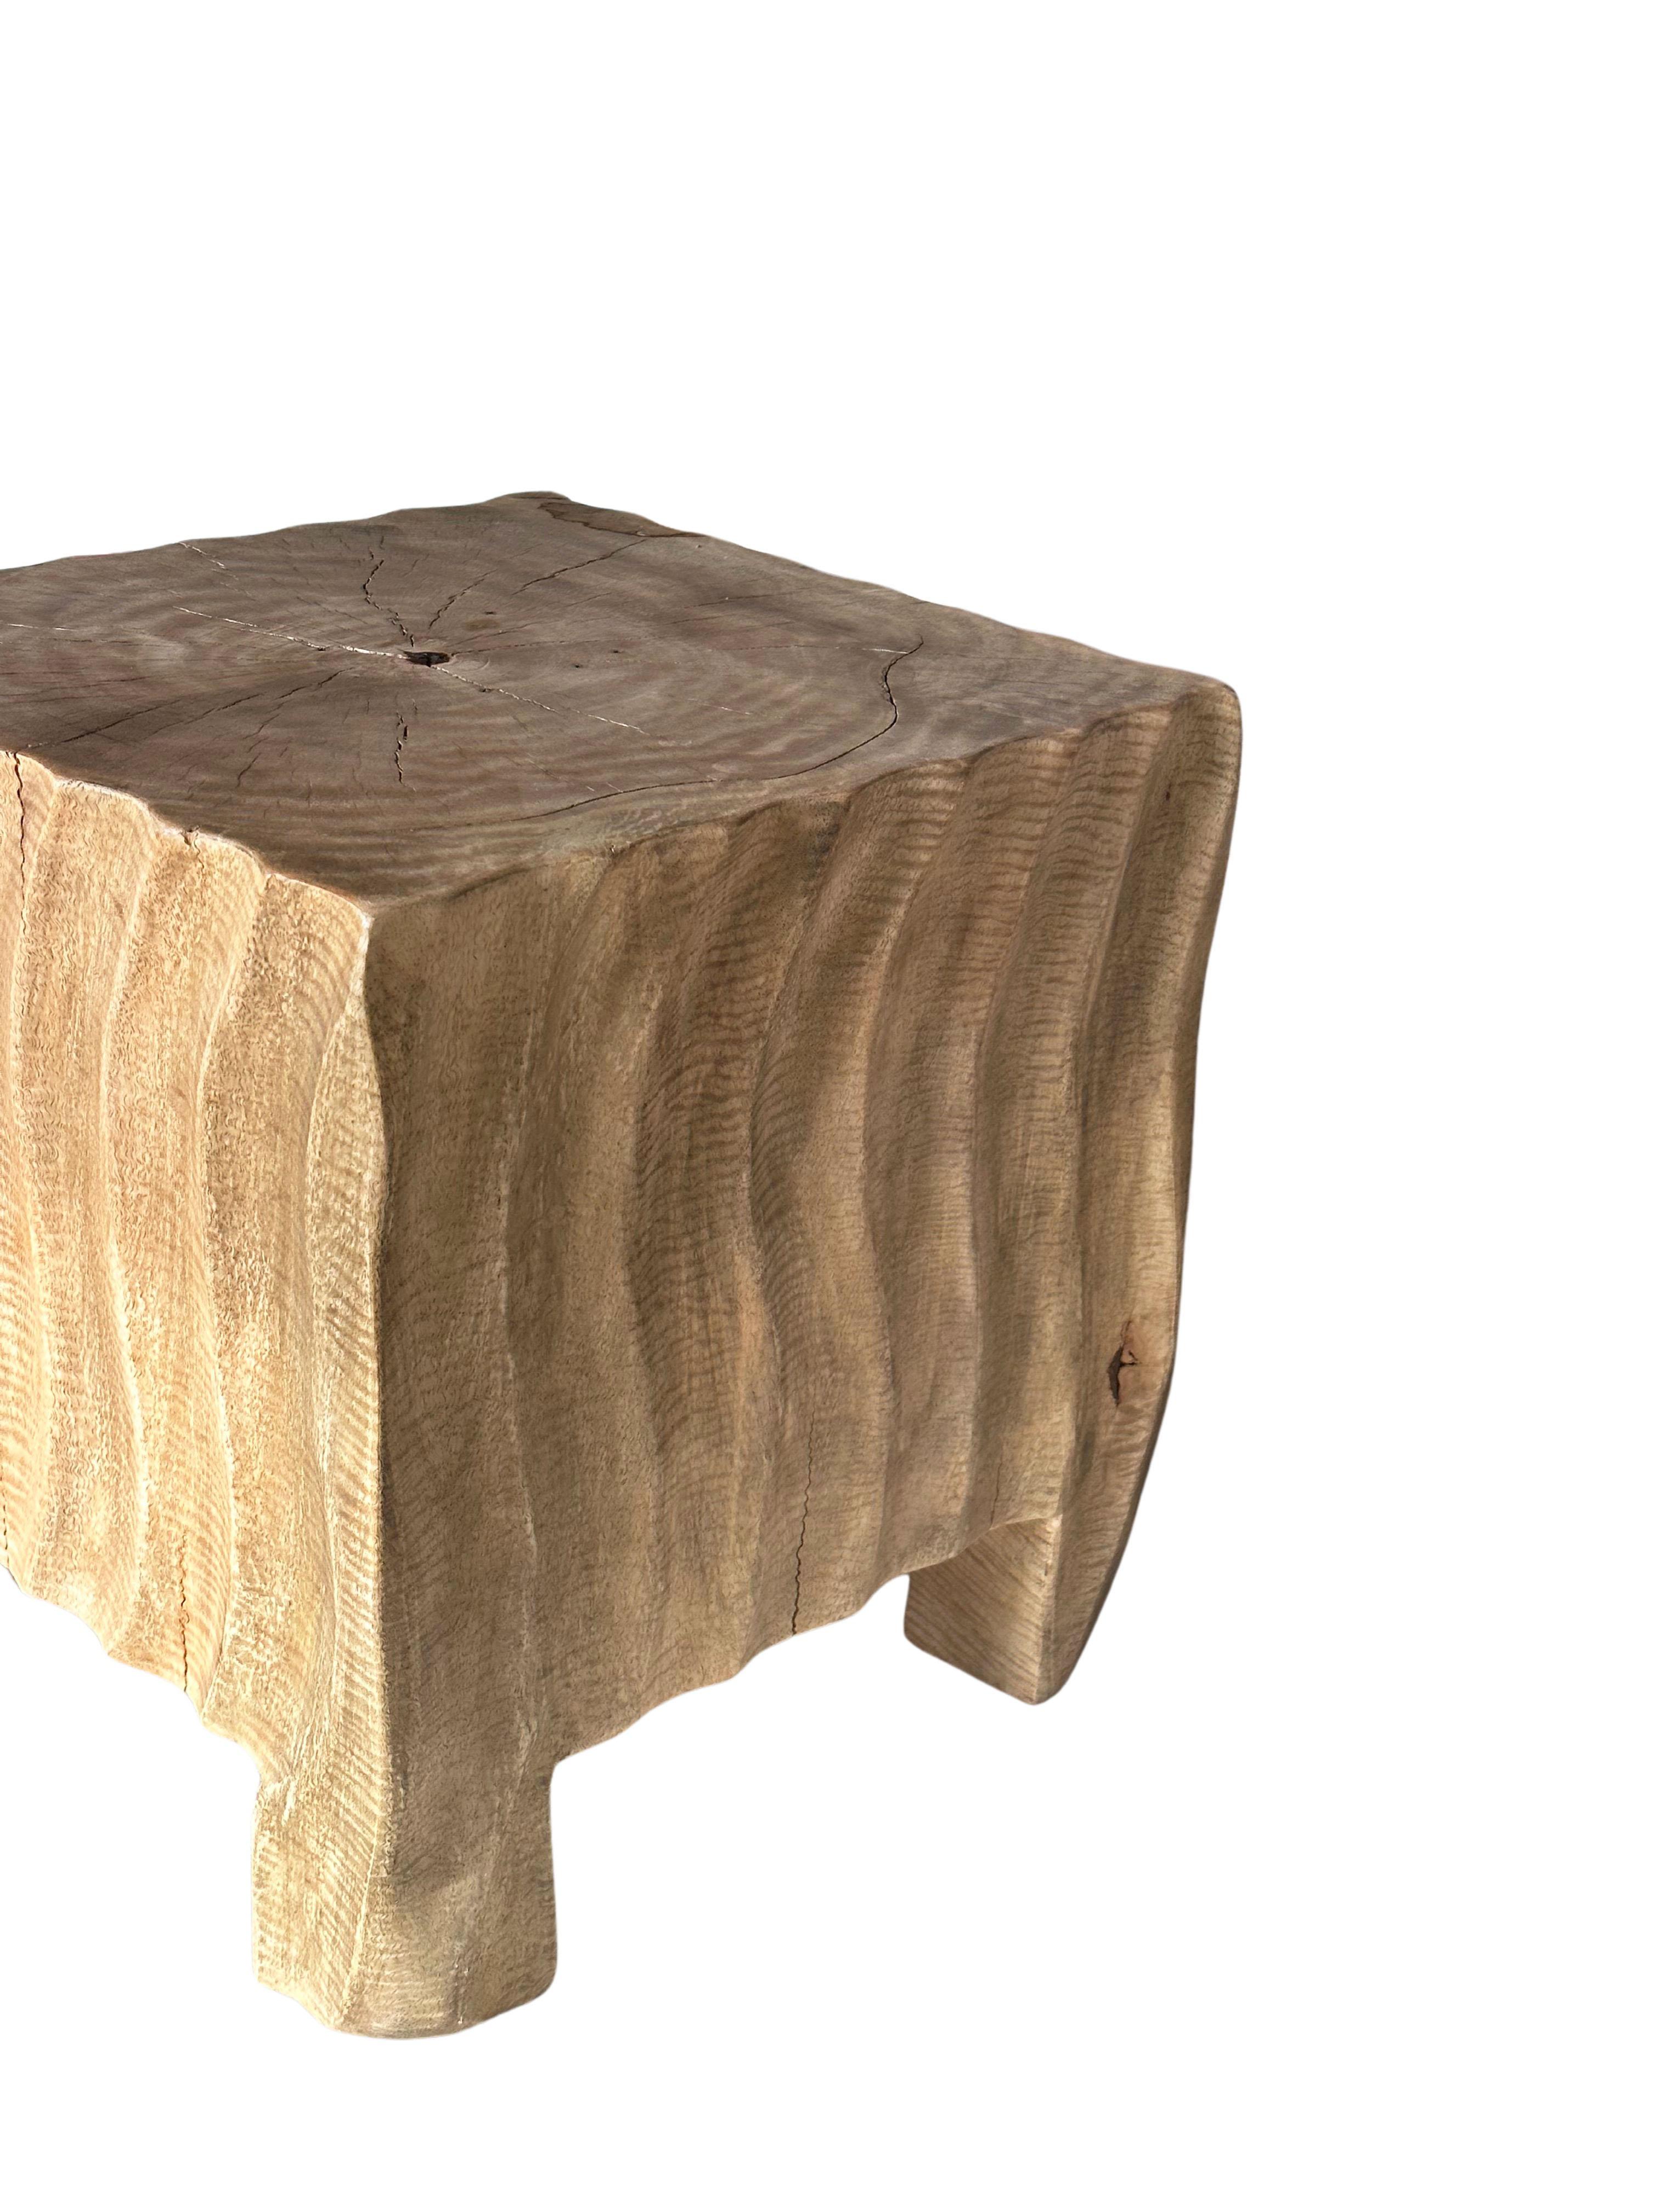 Organic Modern Sculptural Side Table Mango Wood Natural Finish For Sale